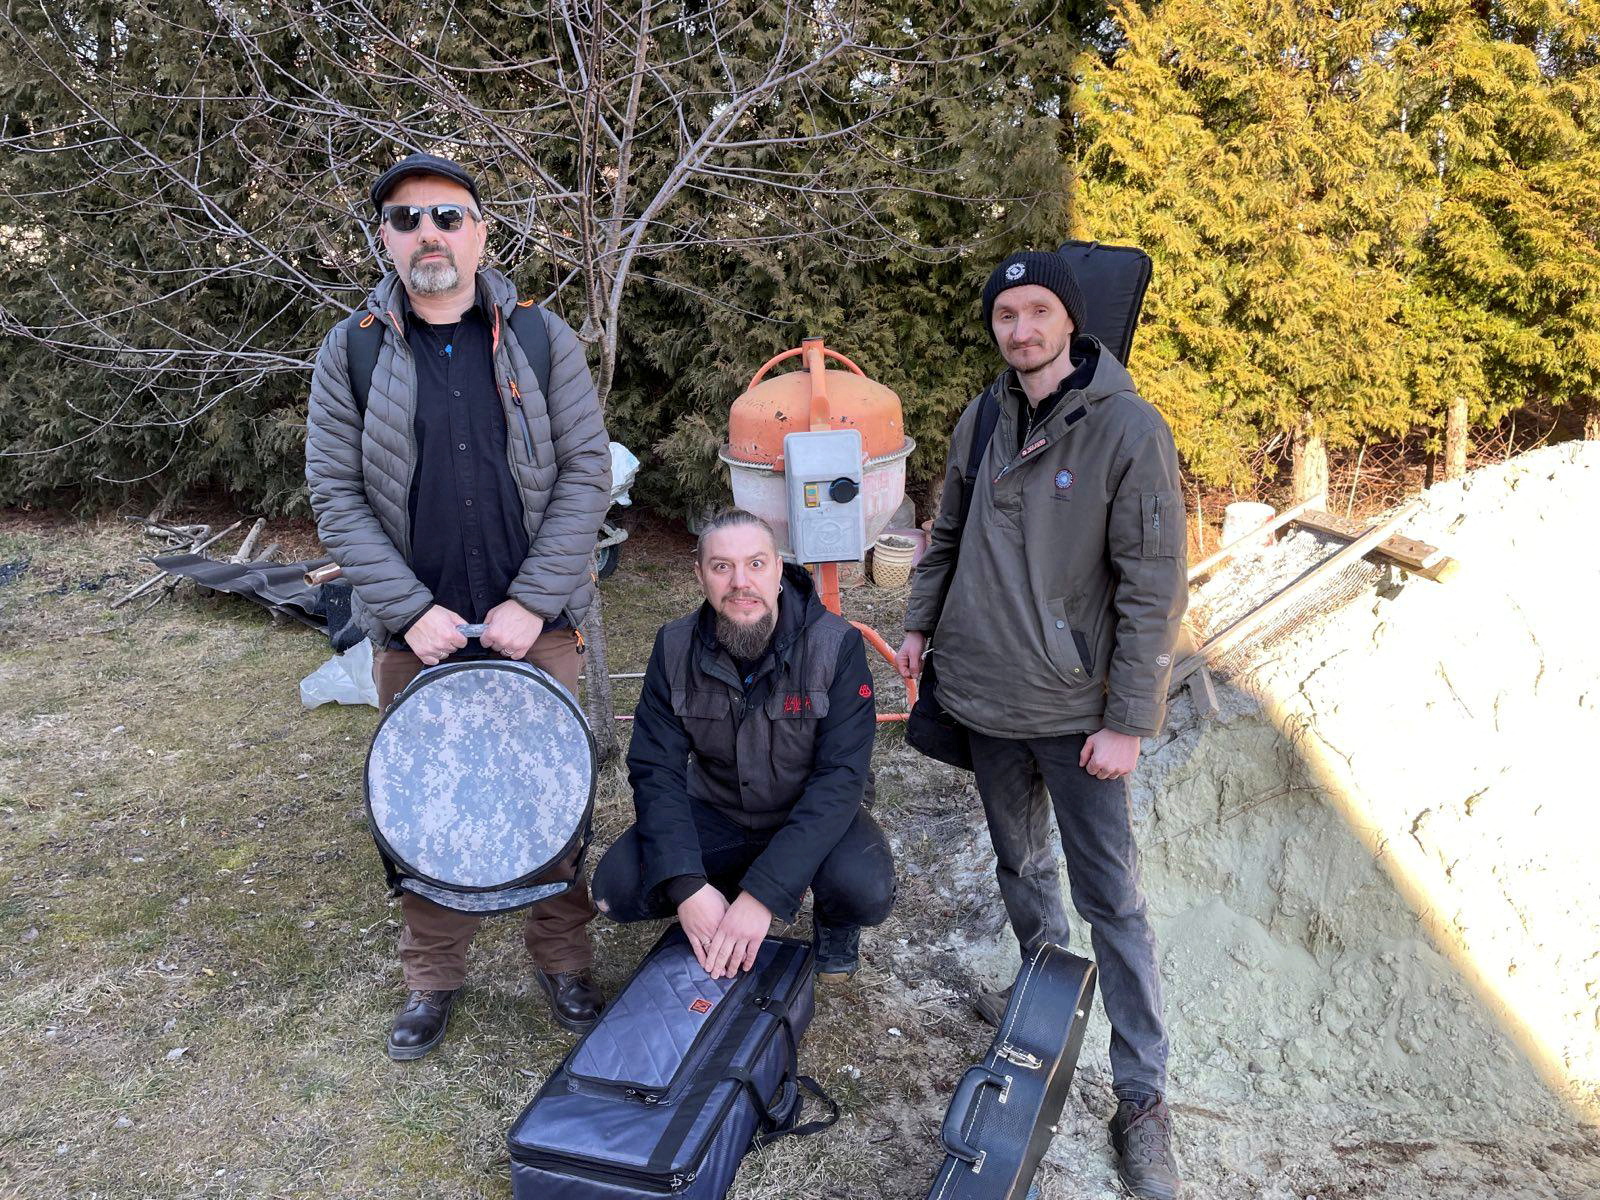 The members of the Ukrainian band Beton, Bohdan Hrynko, Andriy Zholob and Oleg Hula, pose for a picture while getting ready to go to a studio in Lviv to record their single Kyiv Calling